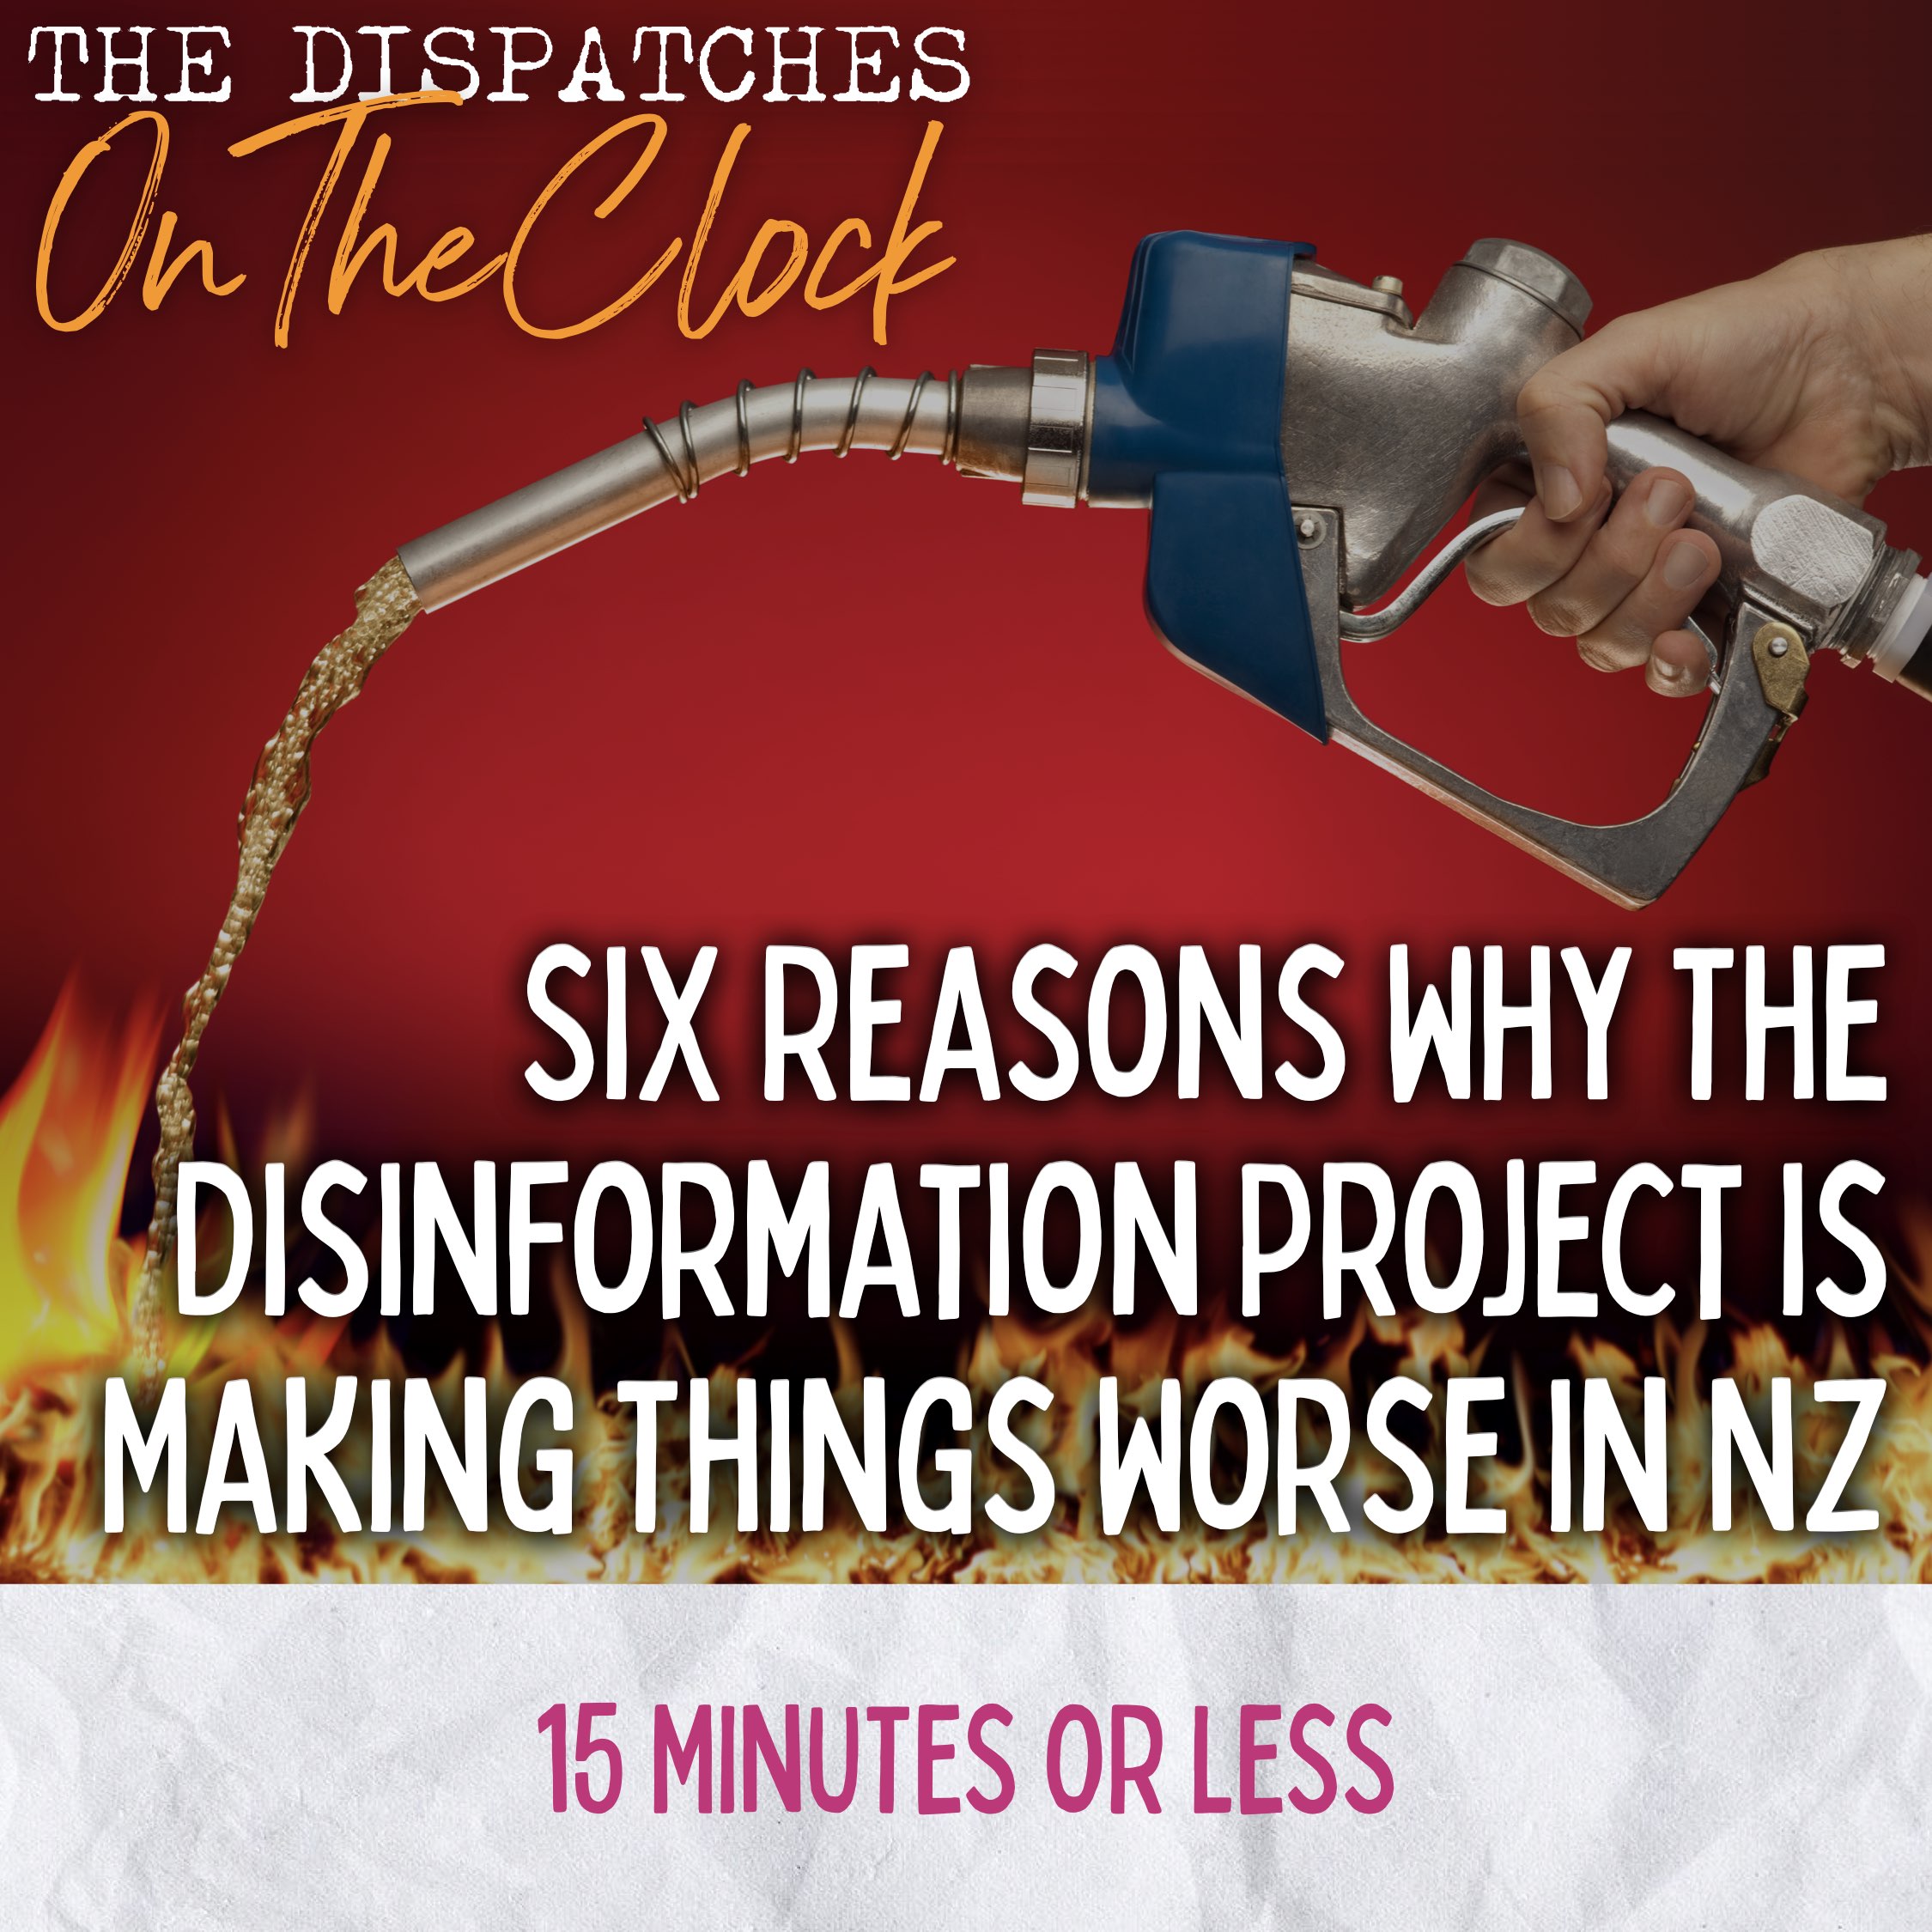 ON THE CLOCK | Six Reasons Why The Disinformation Project is Making Things Worse in NZ